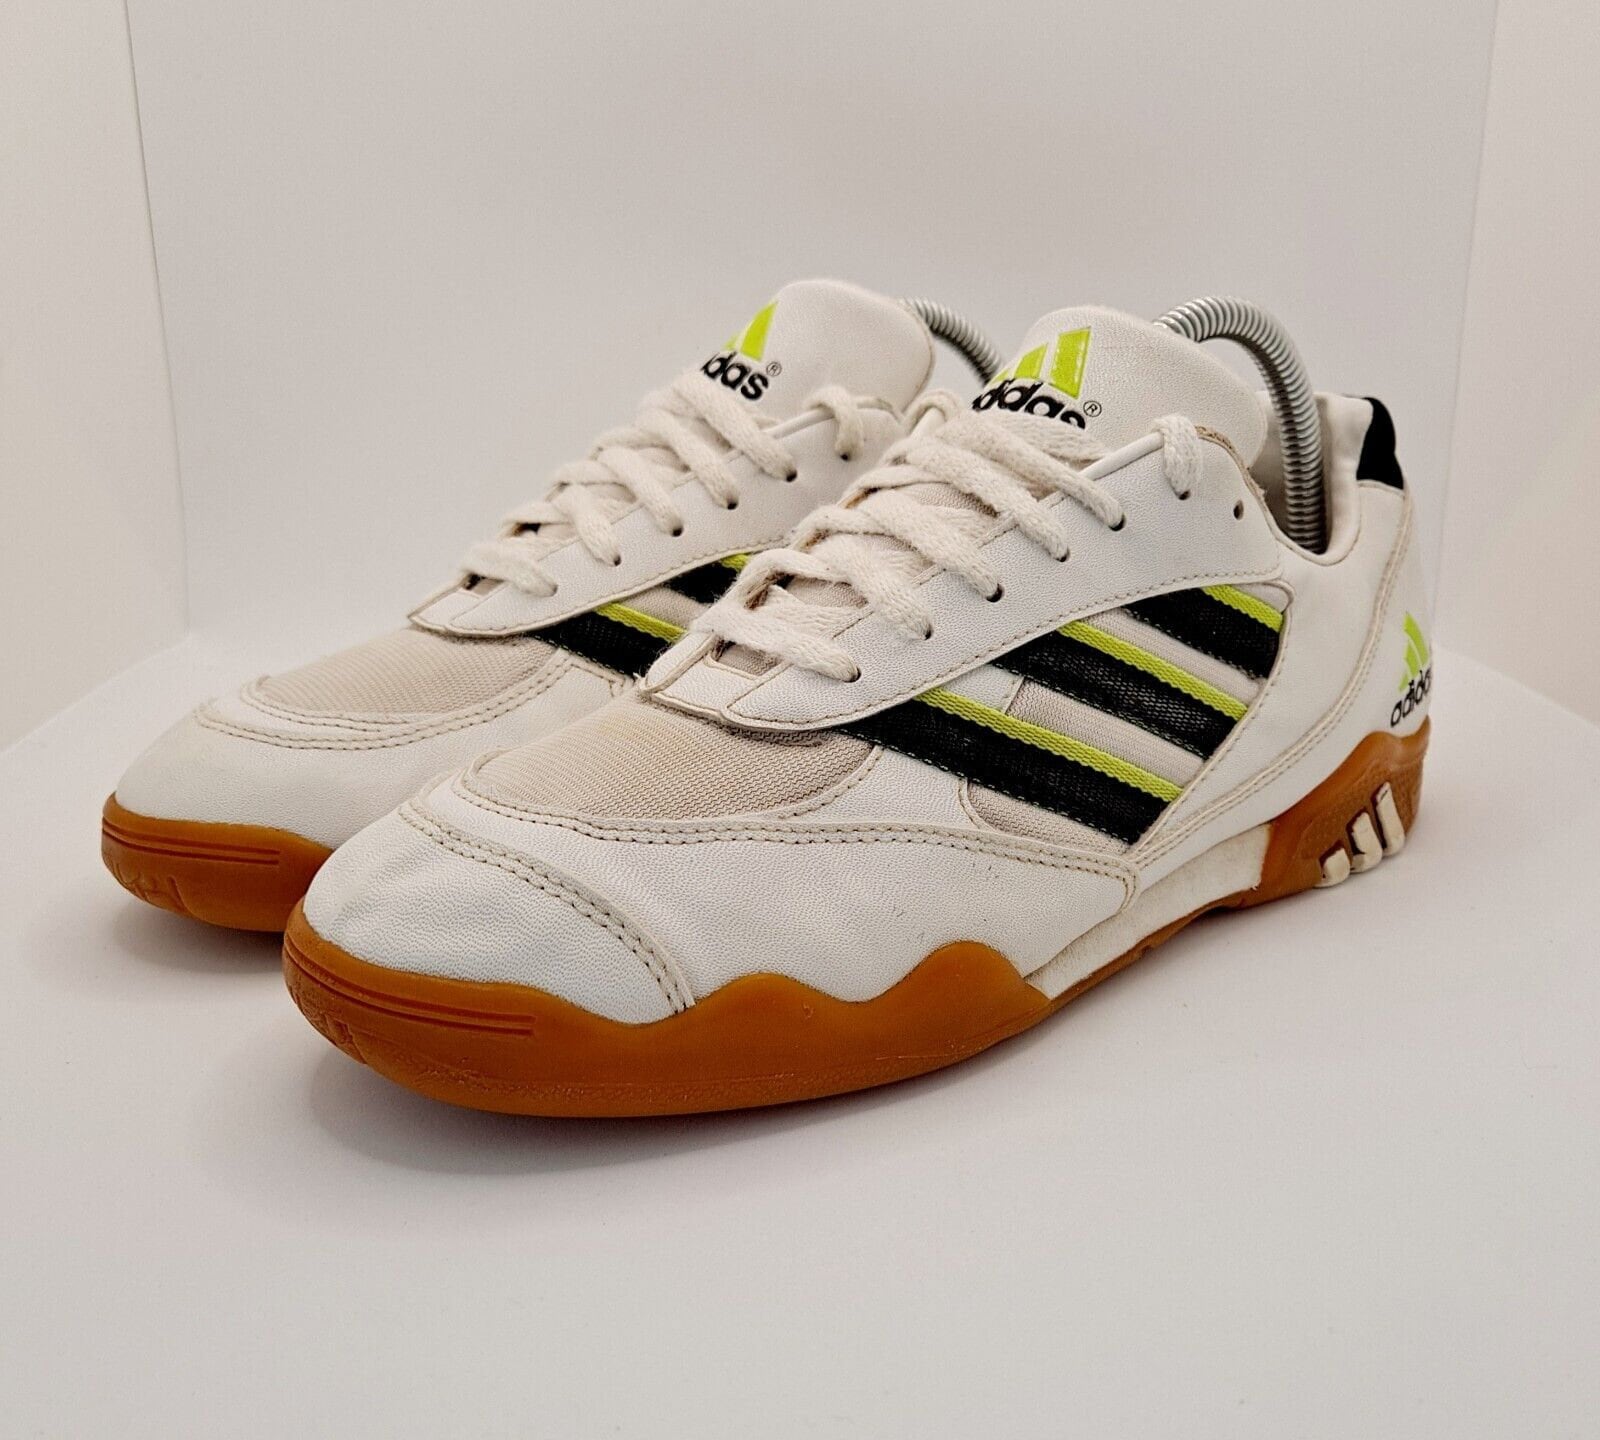 90's Adidas Shoes - Etsy